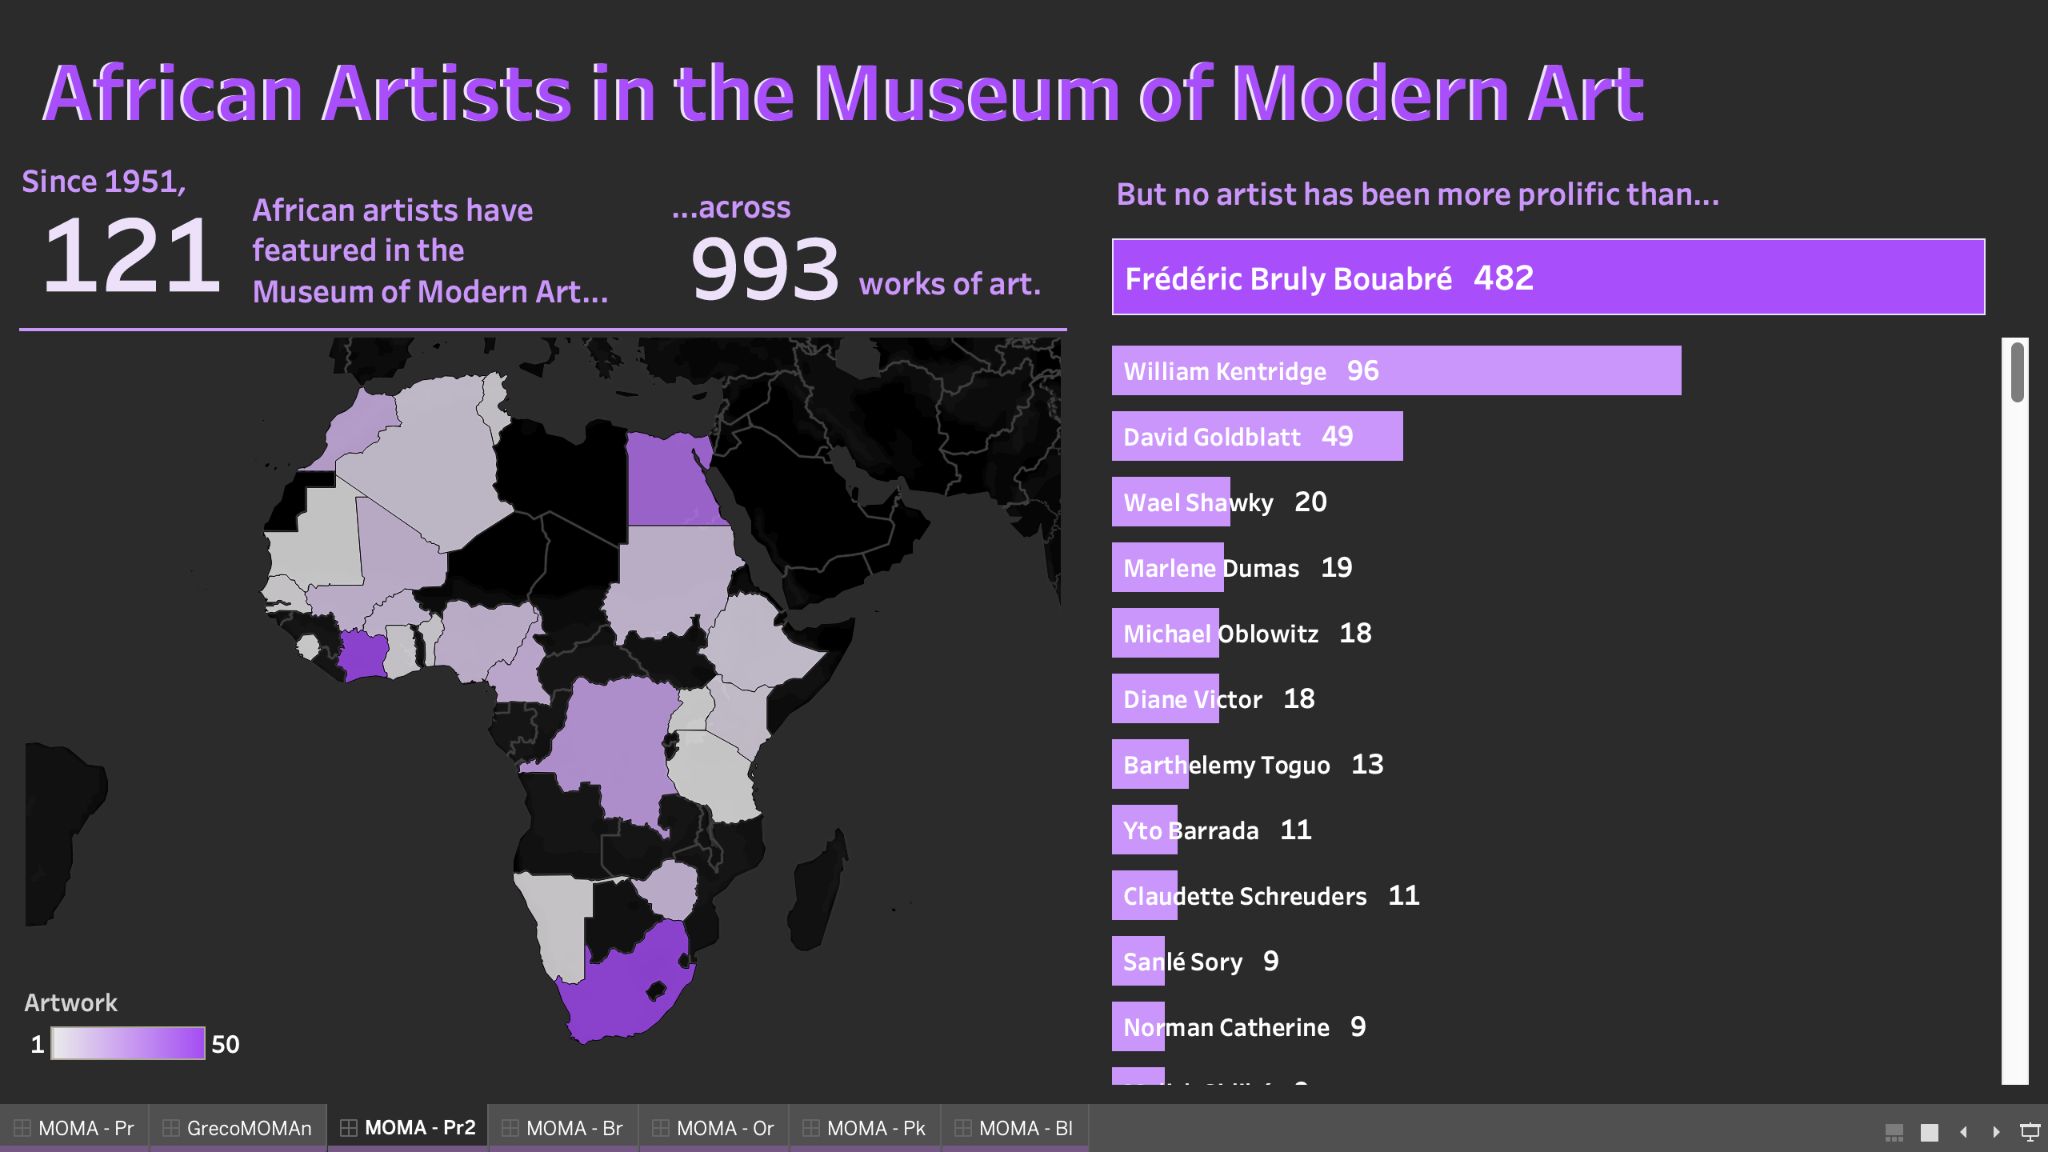 Visualization of African Artists in the Museum of Modern Art with black background and neon purple custom Google Fonts, bar chart, and map of Africa